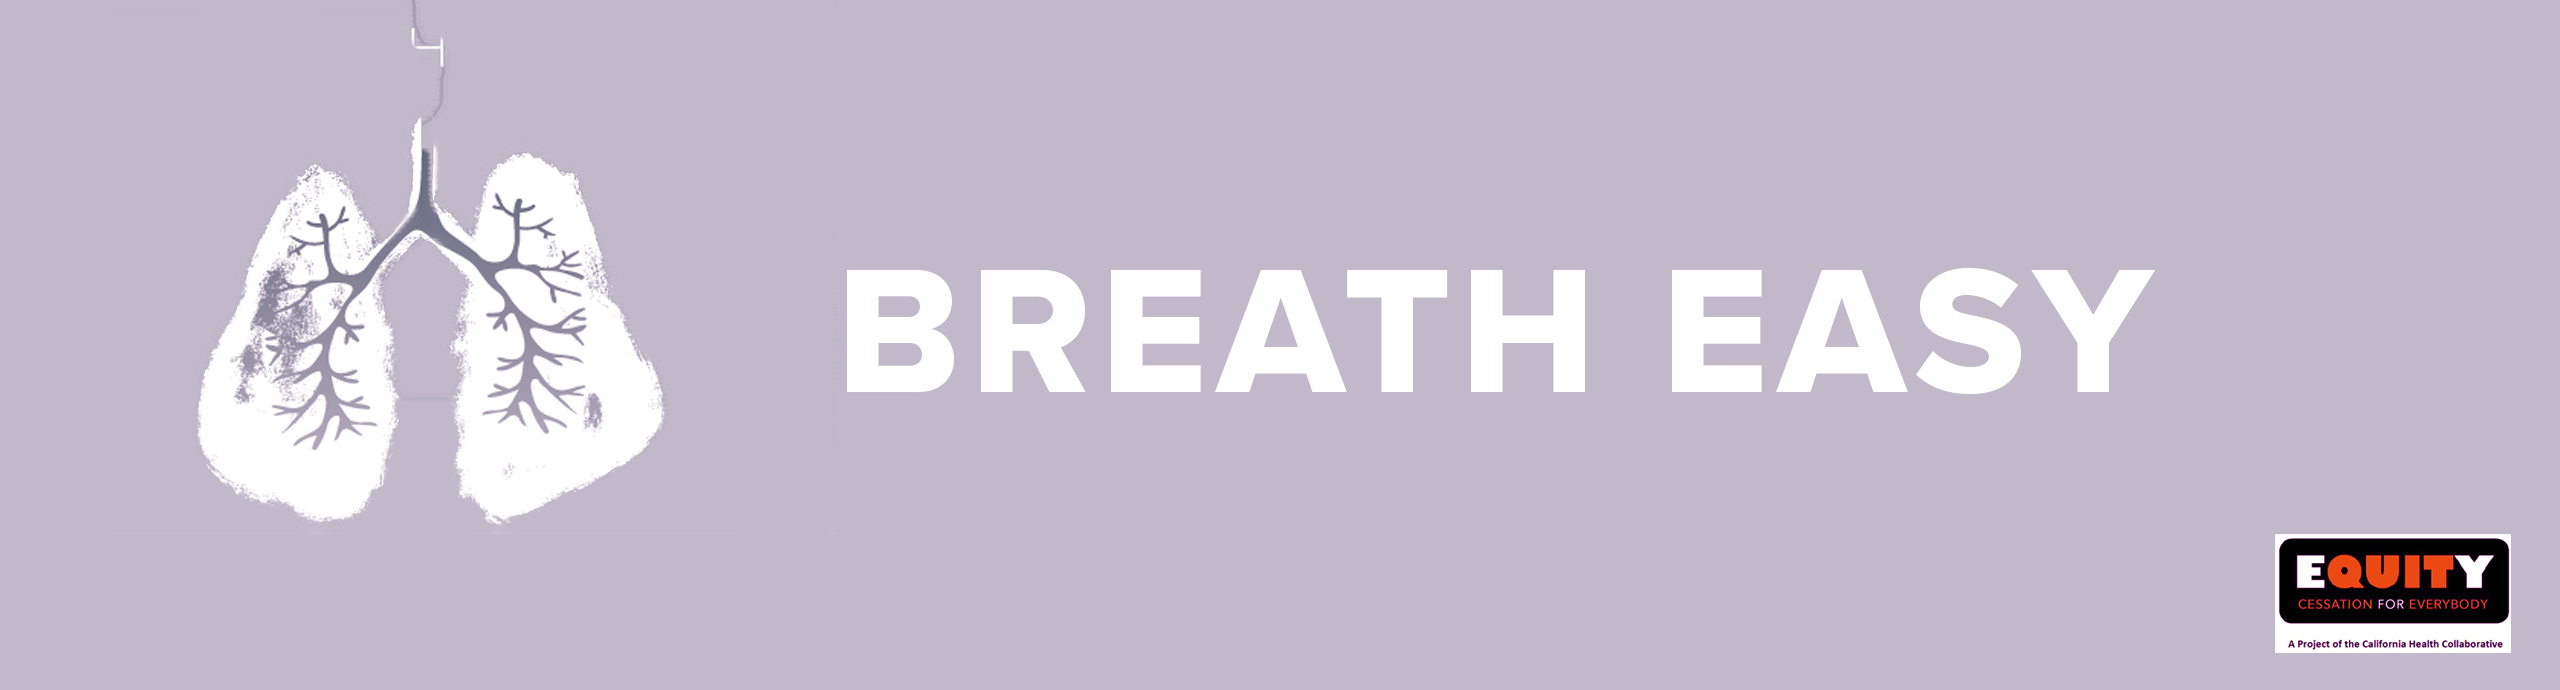 Breathe Easy - EQUITY: Cessation for Everyone. A project of the California Health Collaborative